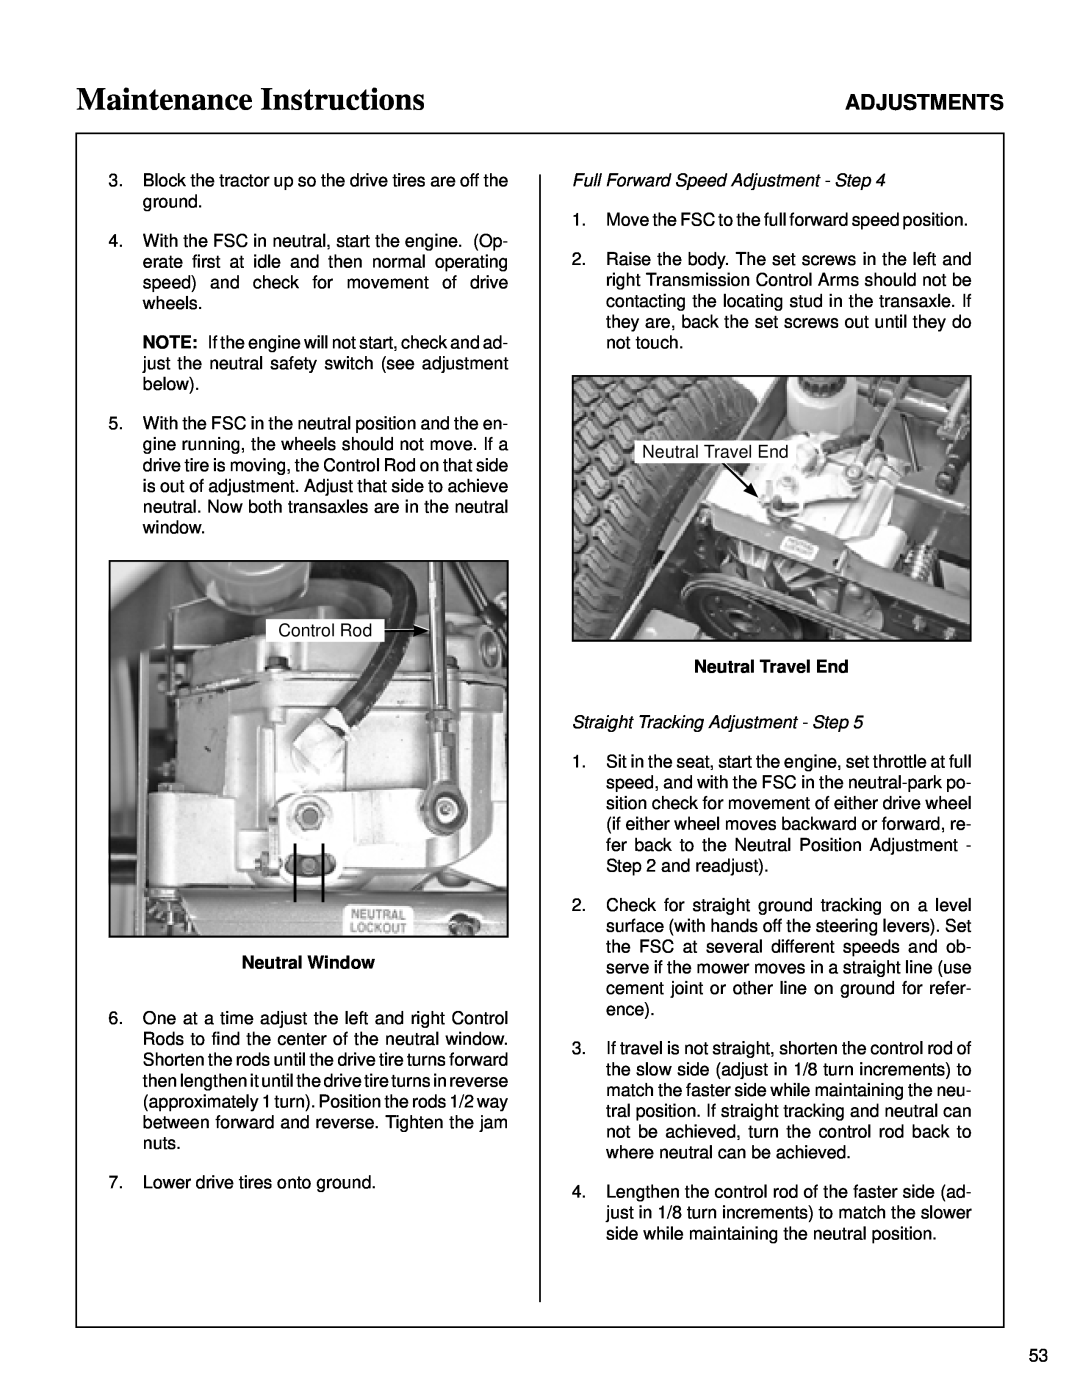 Briggs & Stratton MB (18 HP) owner manual Maintenance Instructions, Adjustments, Neutral Window, Neutral Travel End 